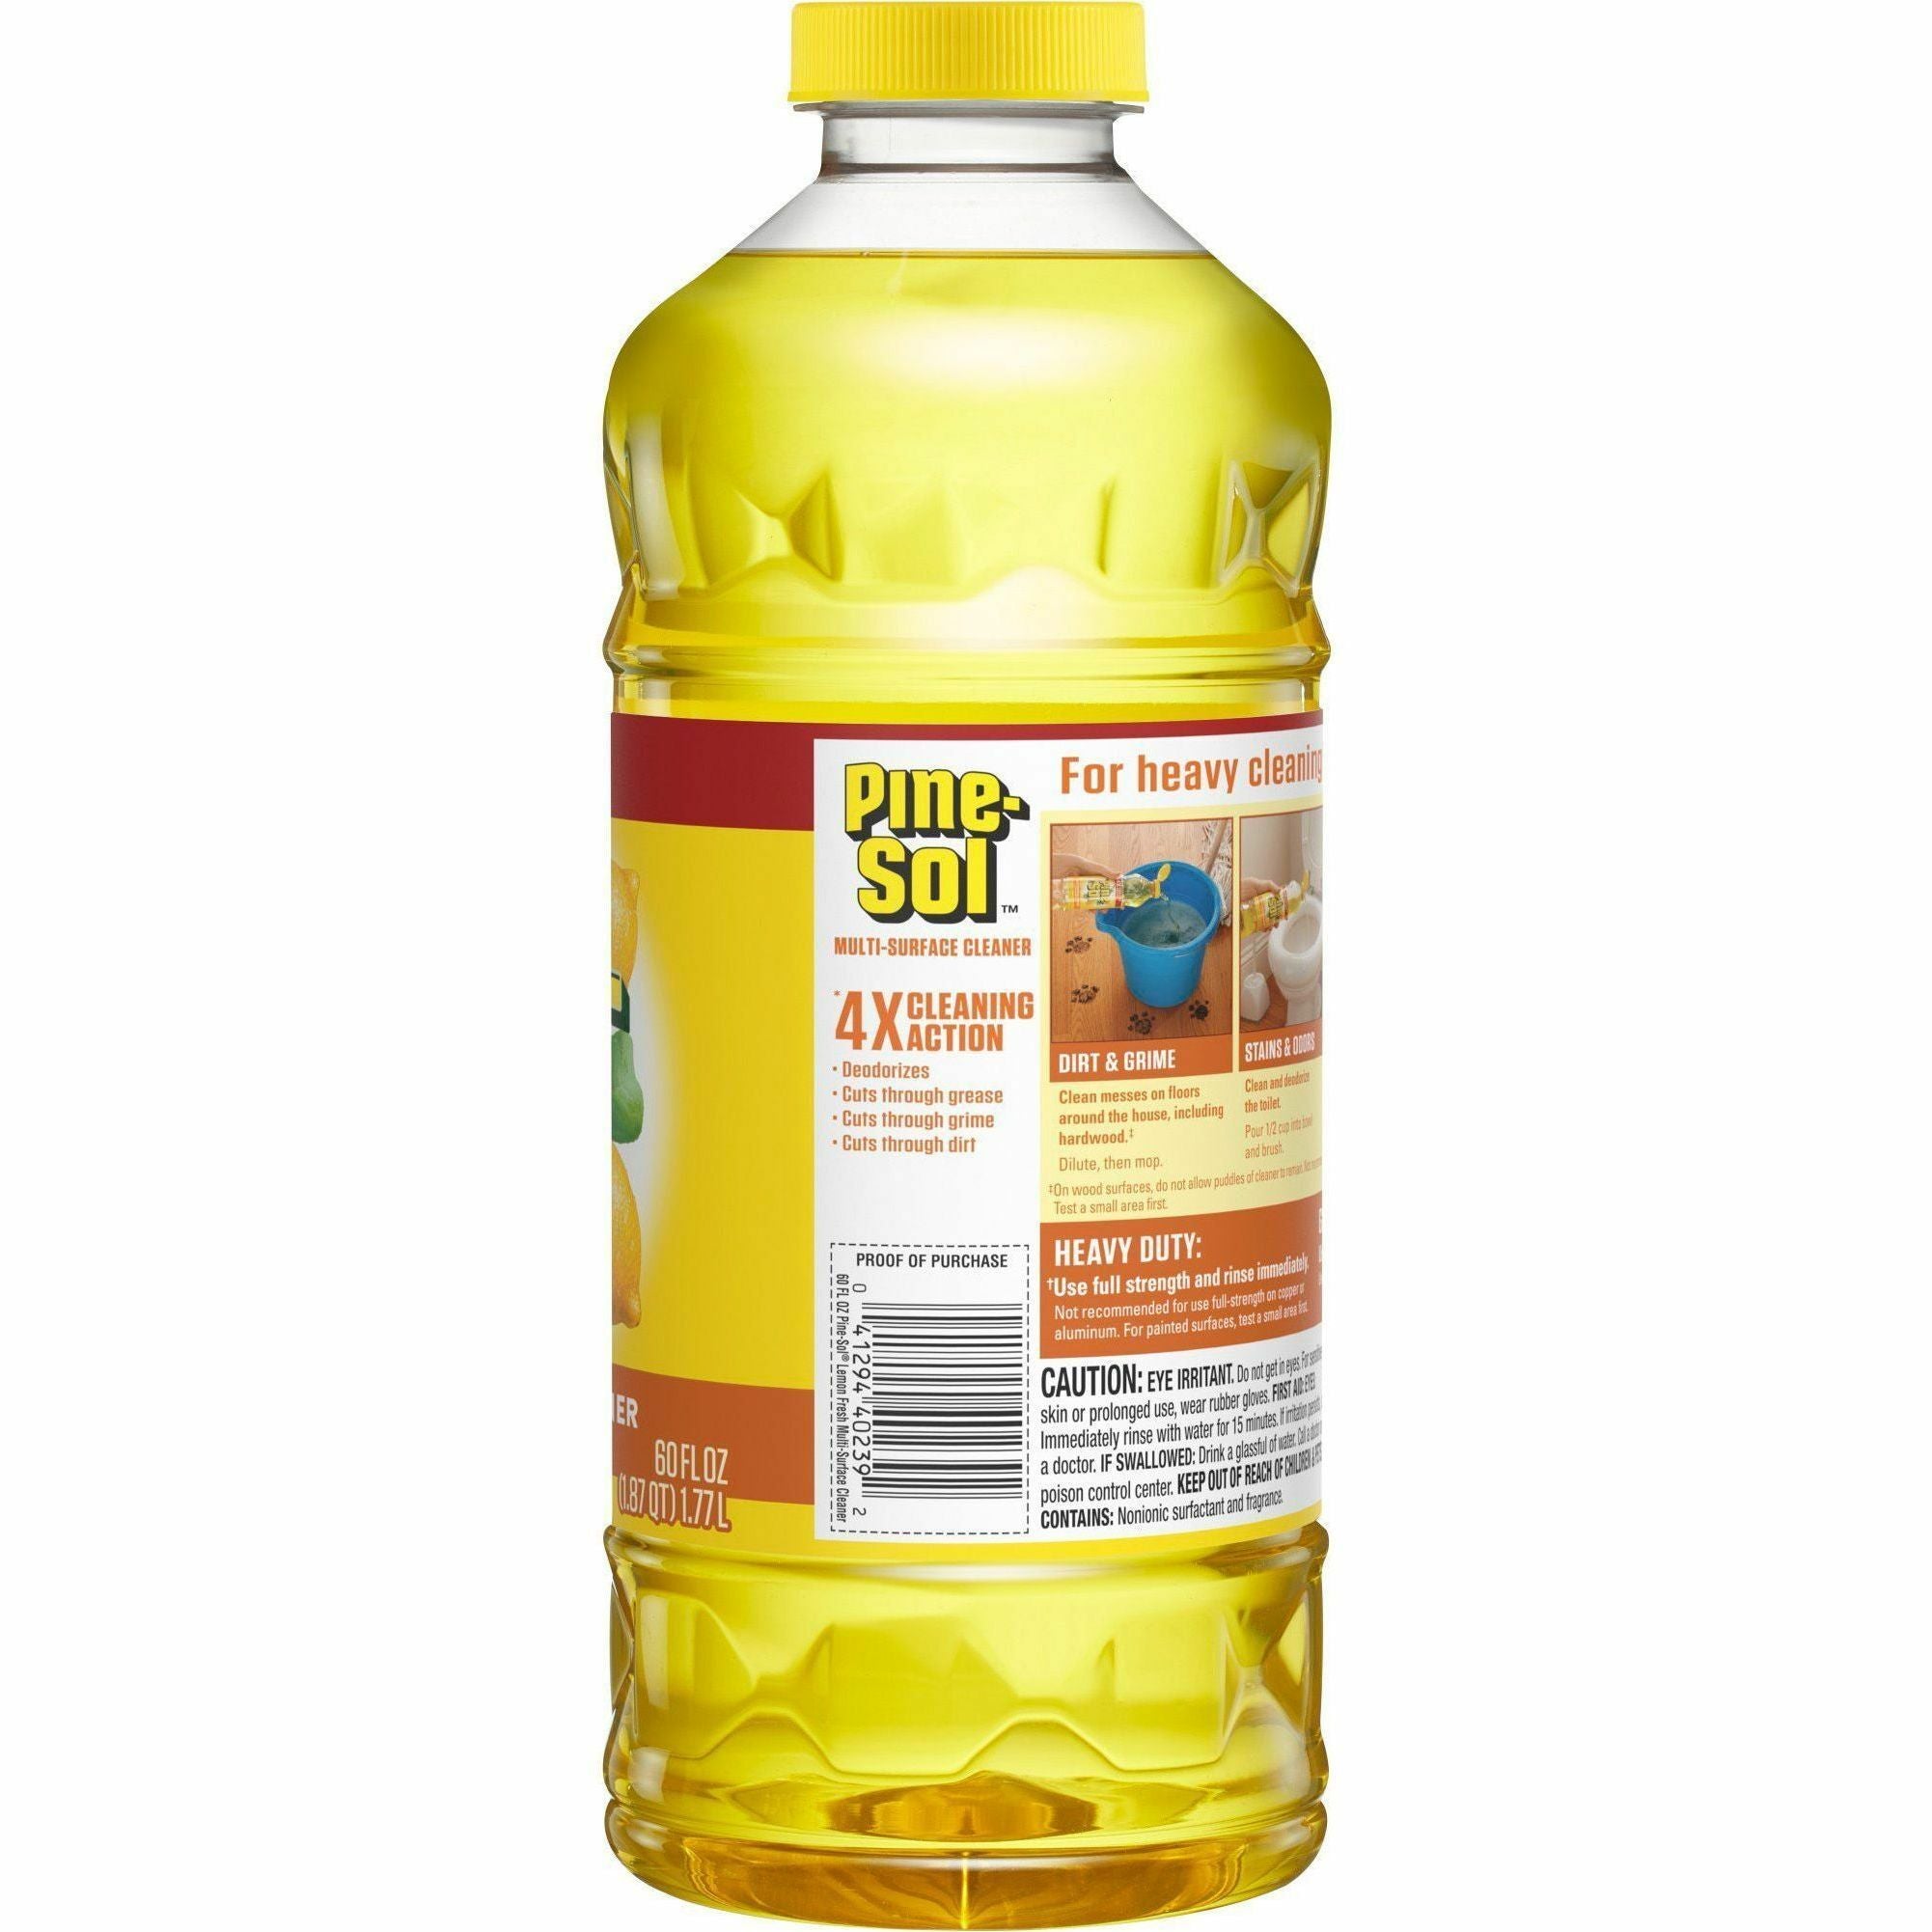 Pine-Sol All Purpose Cleaner - For Multipurpose - Concentrate - 60 fl oz (1.9 quart) - Lemon Fresh Scent - 1 Each - Deodorize, Disinfectant, Residue-free - Yellow - 